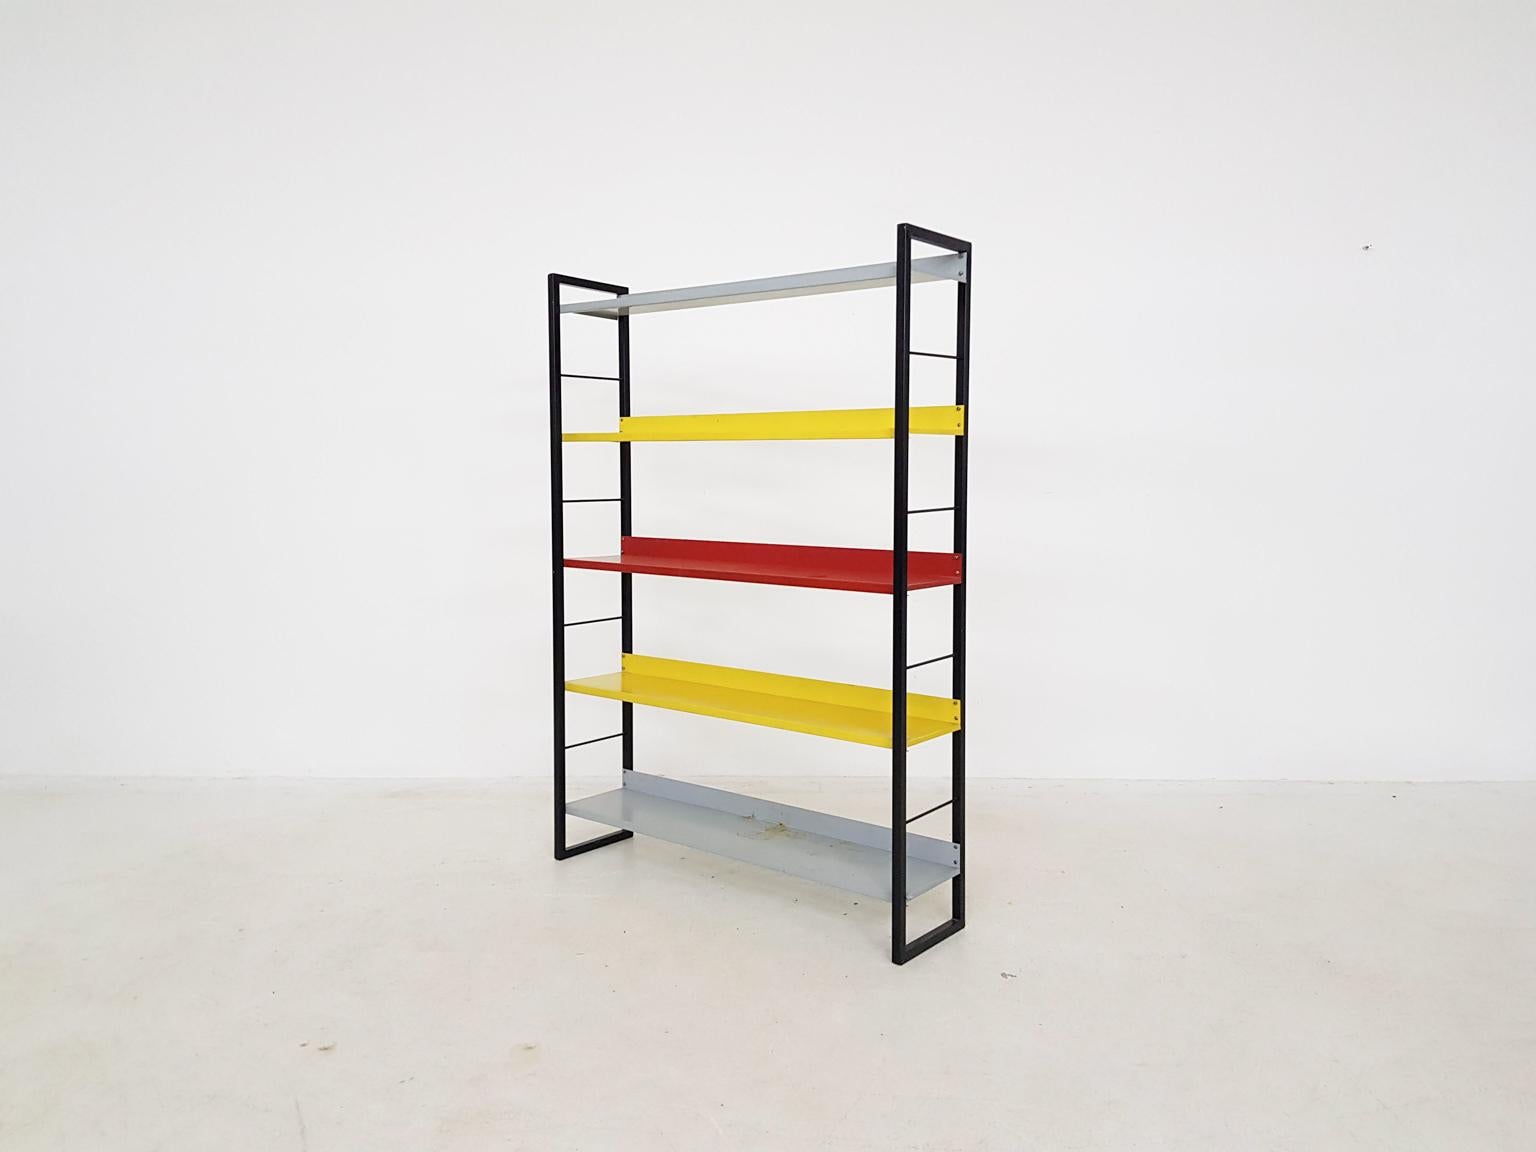 Iconic Dutch design. The metal coloured bookcase or shelves by D. Dekker for Tomado. Dutch mid-century design at its finest, designed and made in the 1950's. Tomado was a Dutch furniture producer mainly famous for their coloured wall shelves and